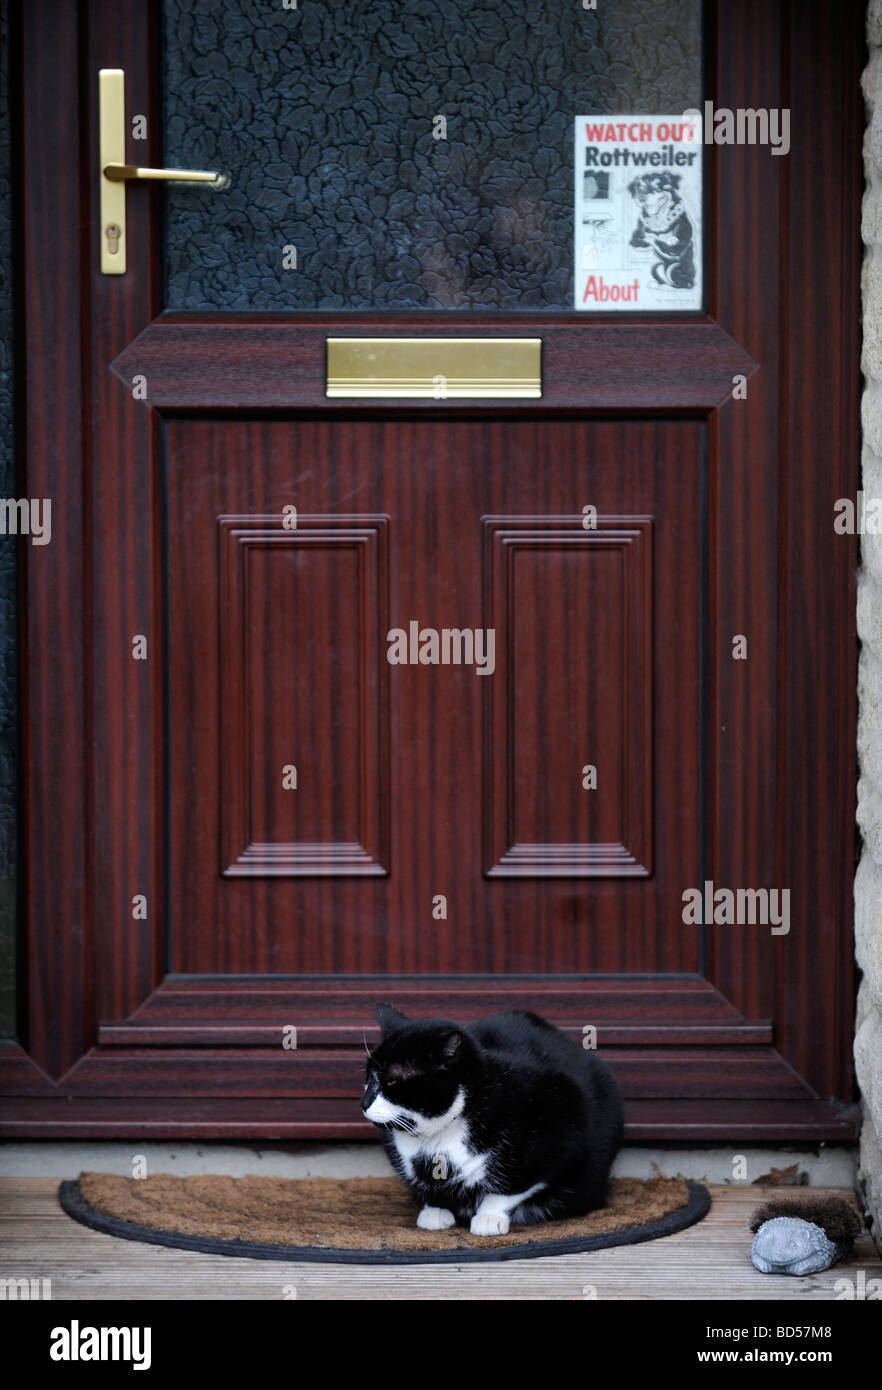 A CAT SITTING ON A DOORSTEP WITH A ROTTWEILER DOG WARNING SIGN ON THE HOUSE FRONT DOOR UK Stock Photo